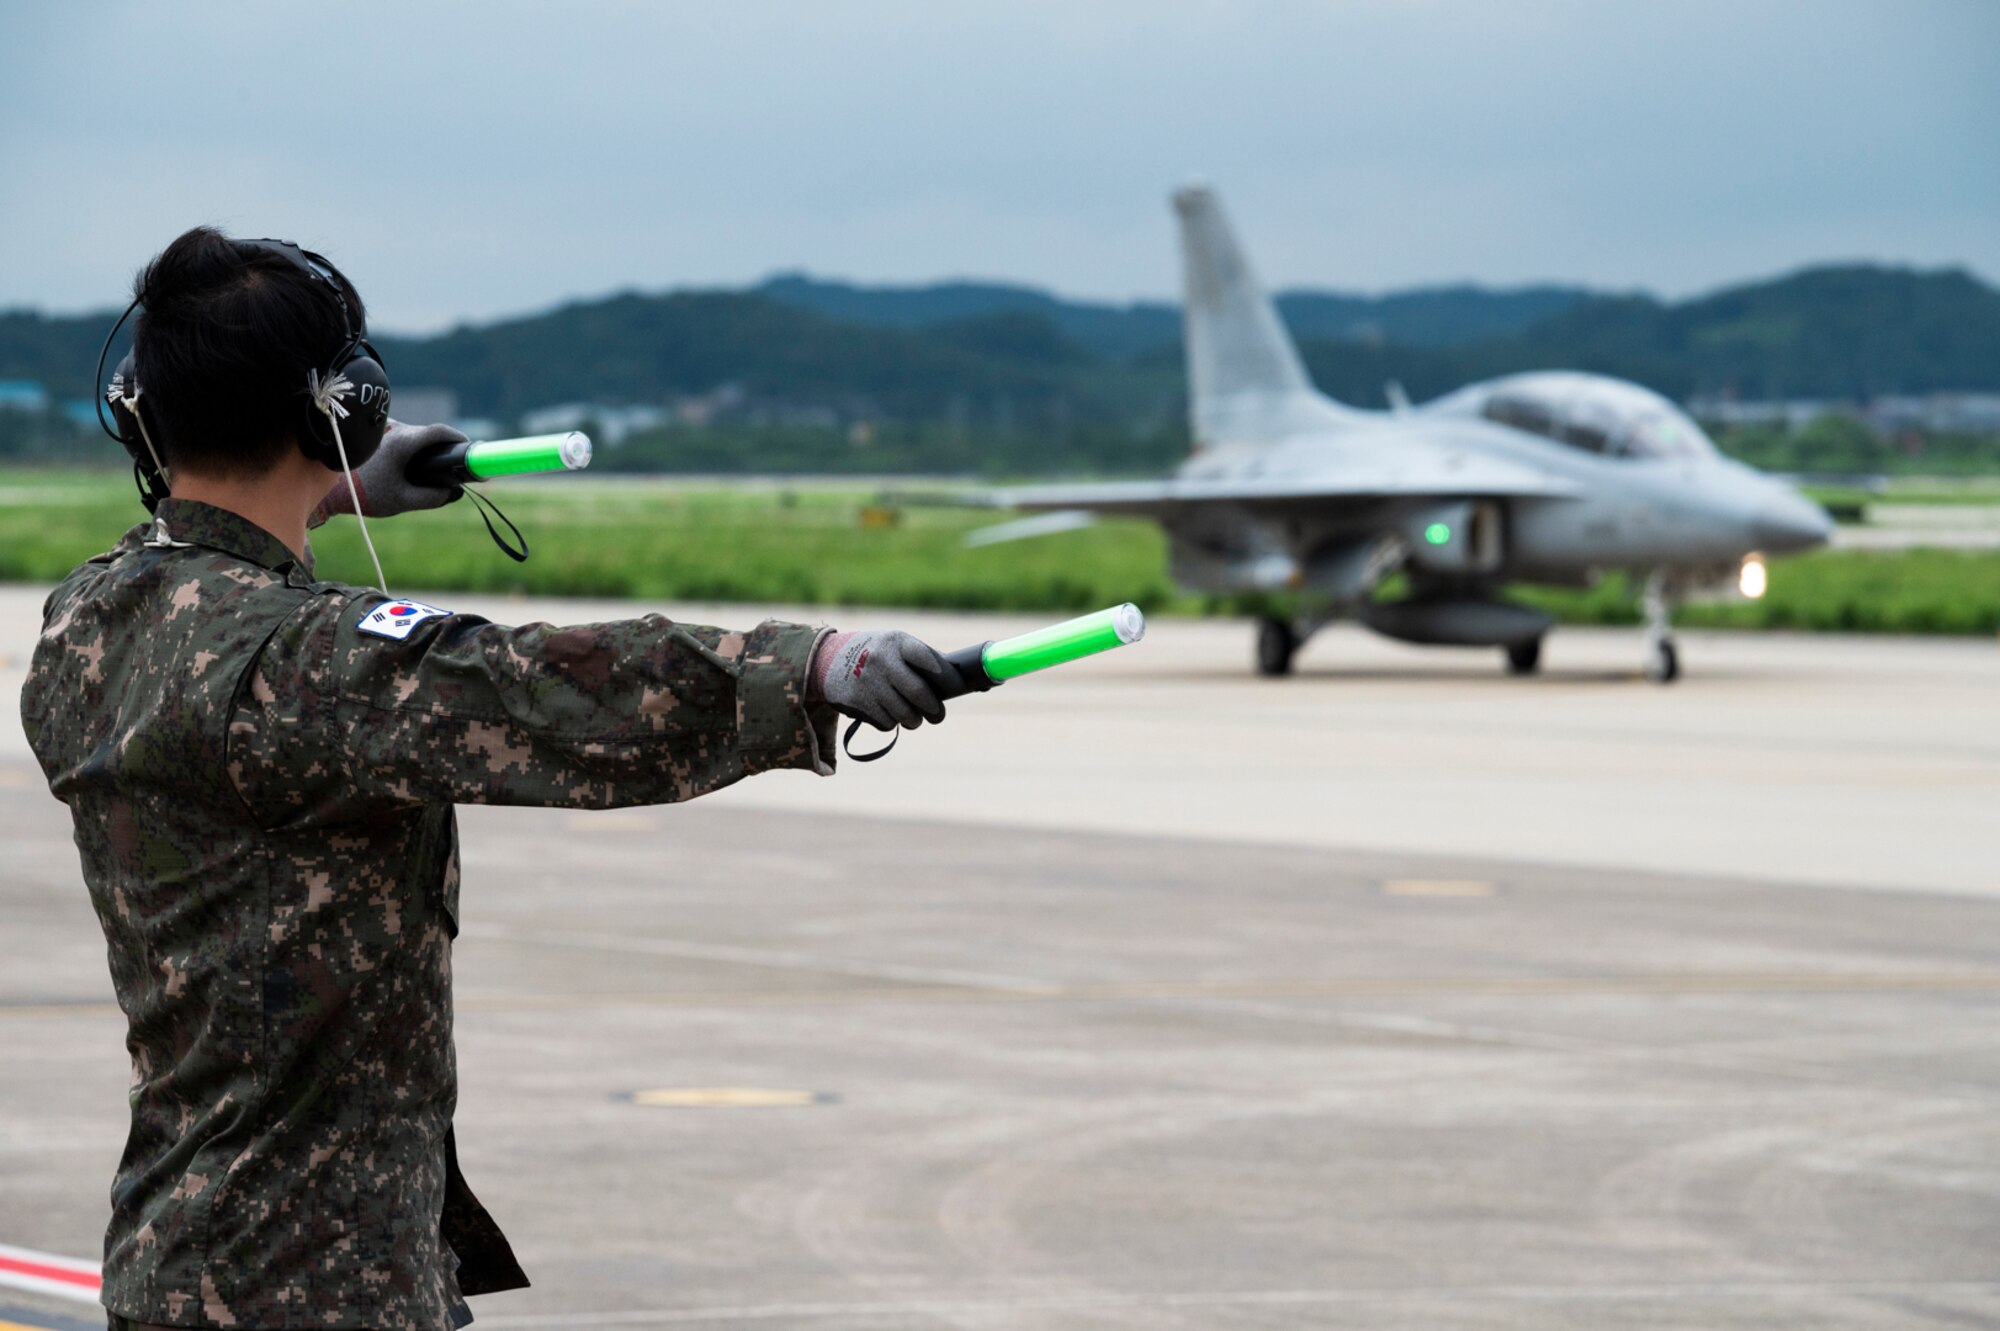 A Republic of Korea Air Force maintainer guides a FA-50 Golden Eagle as it taxis off the runway during Buddy Squadron 22 at Osan Air Base, Republic of Korea, Aug 2, 2022.